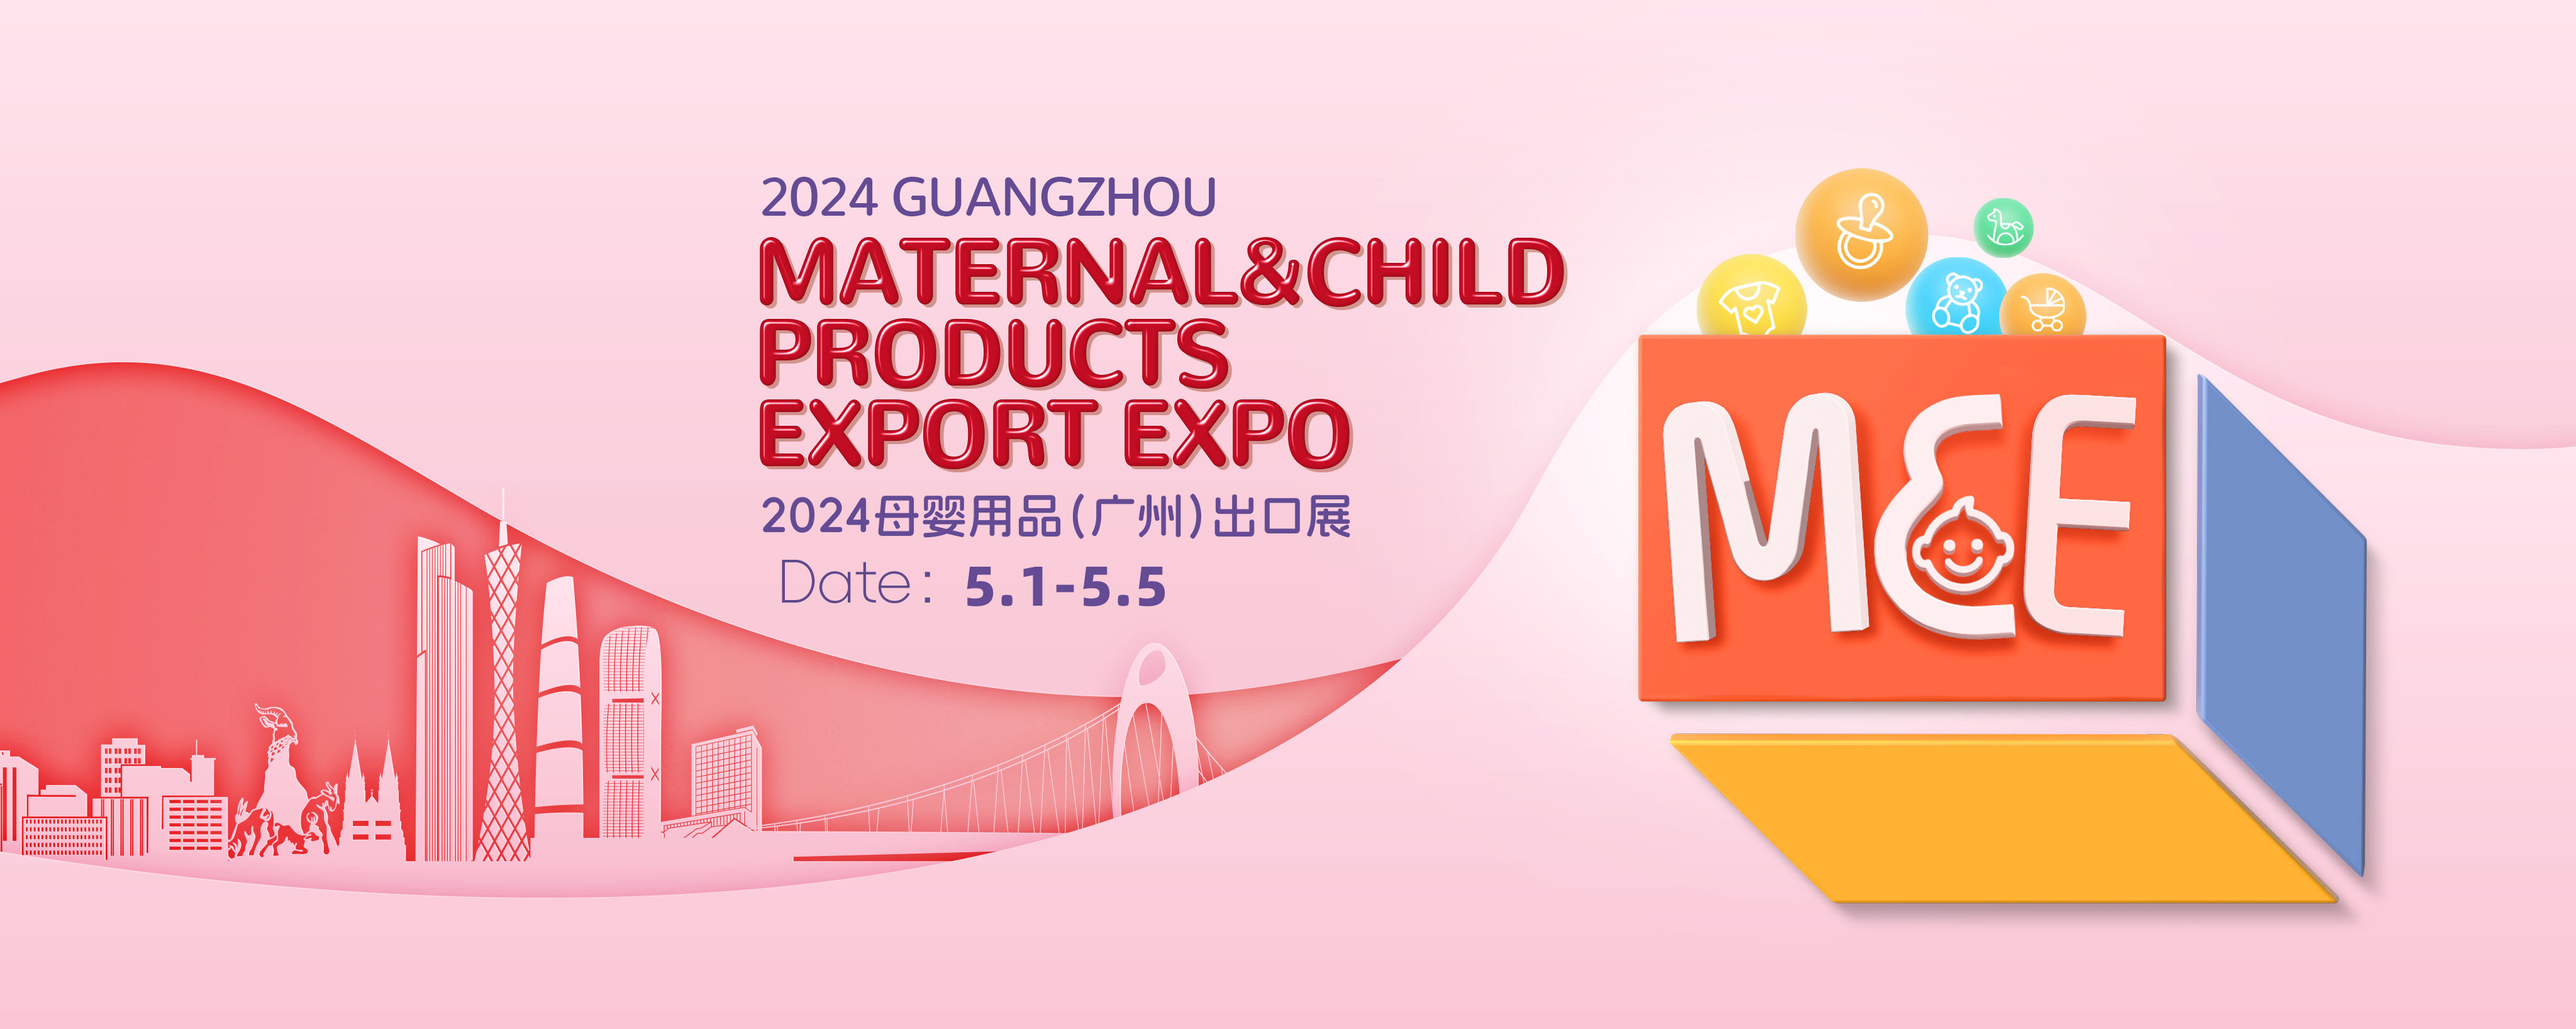 2024 Guangzhou maternal&child products export expo.jpg